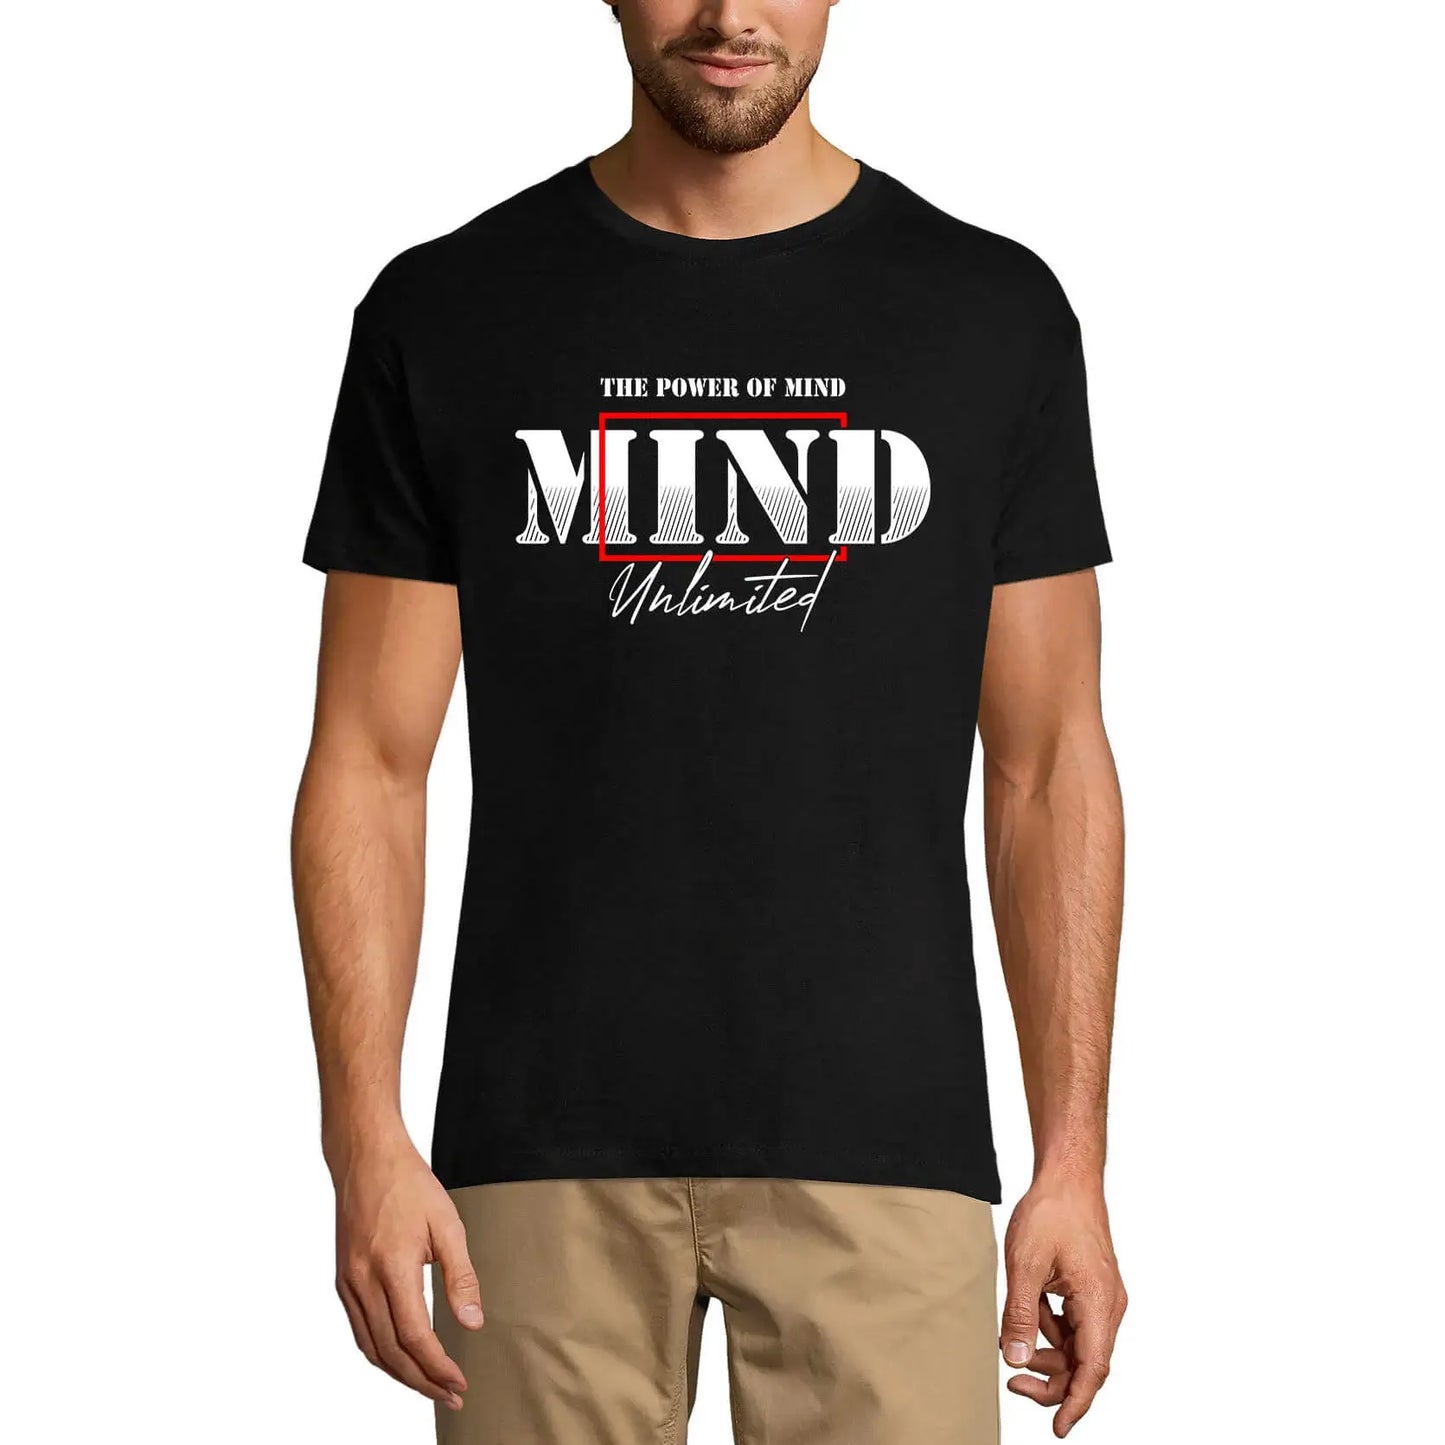 Men's Graphic T-Shirt The Power Of Mind Unlimited Eco-Friendly Limited Edition Short Sleeve Tee-Shirt Vintage Birthday Gift Novelty